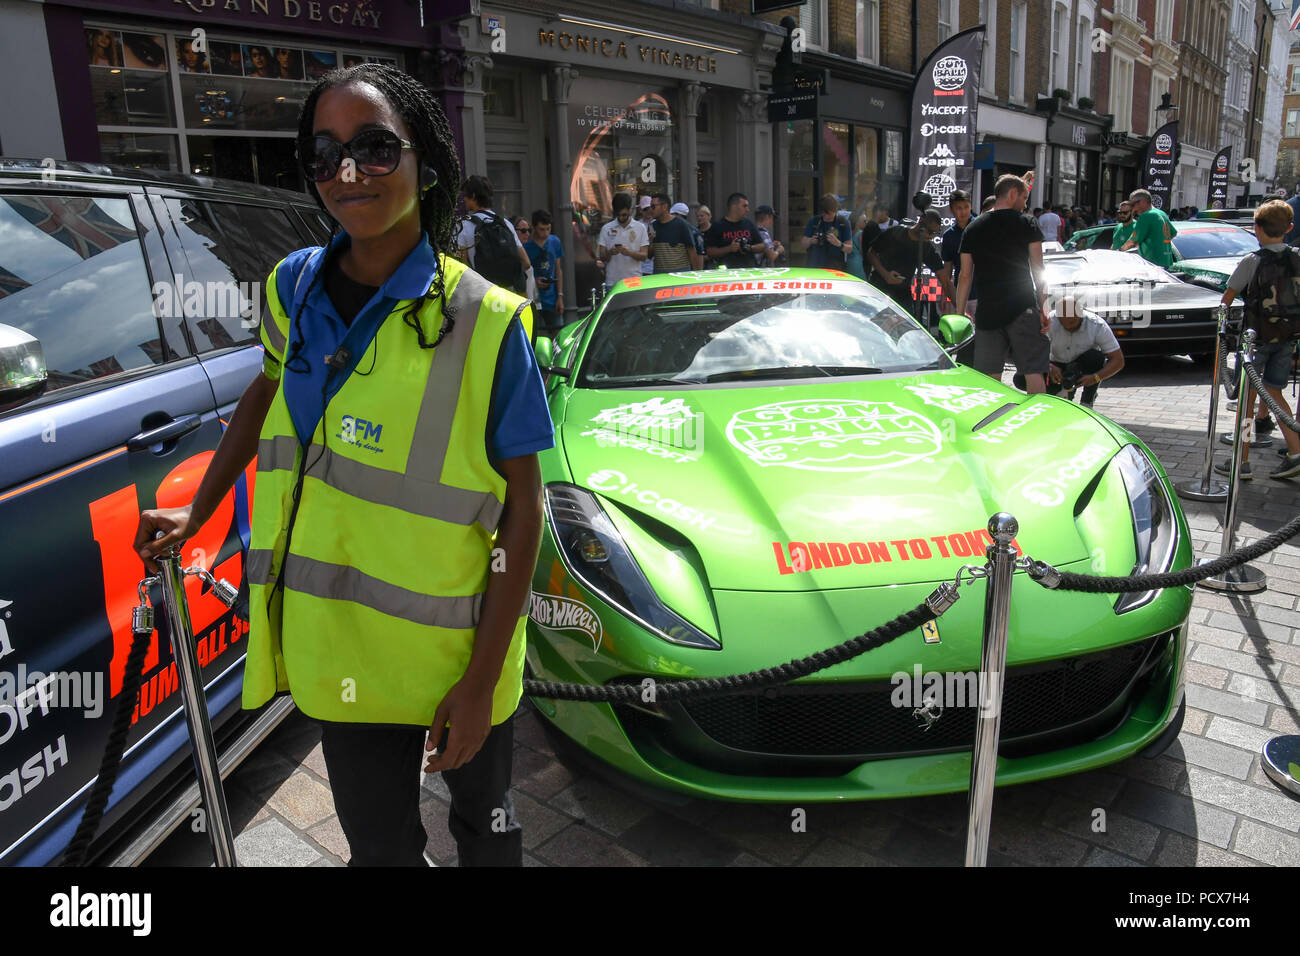 London, UK, 4 Aug 2018. Gumball 3000 rally 2018: One hundred supercars display in Covent garden on August 4 2018, London, UK. Credit: Picture Capital/Alamy Live News Stock Photo